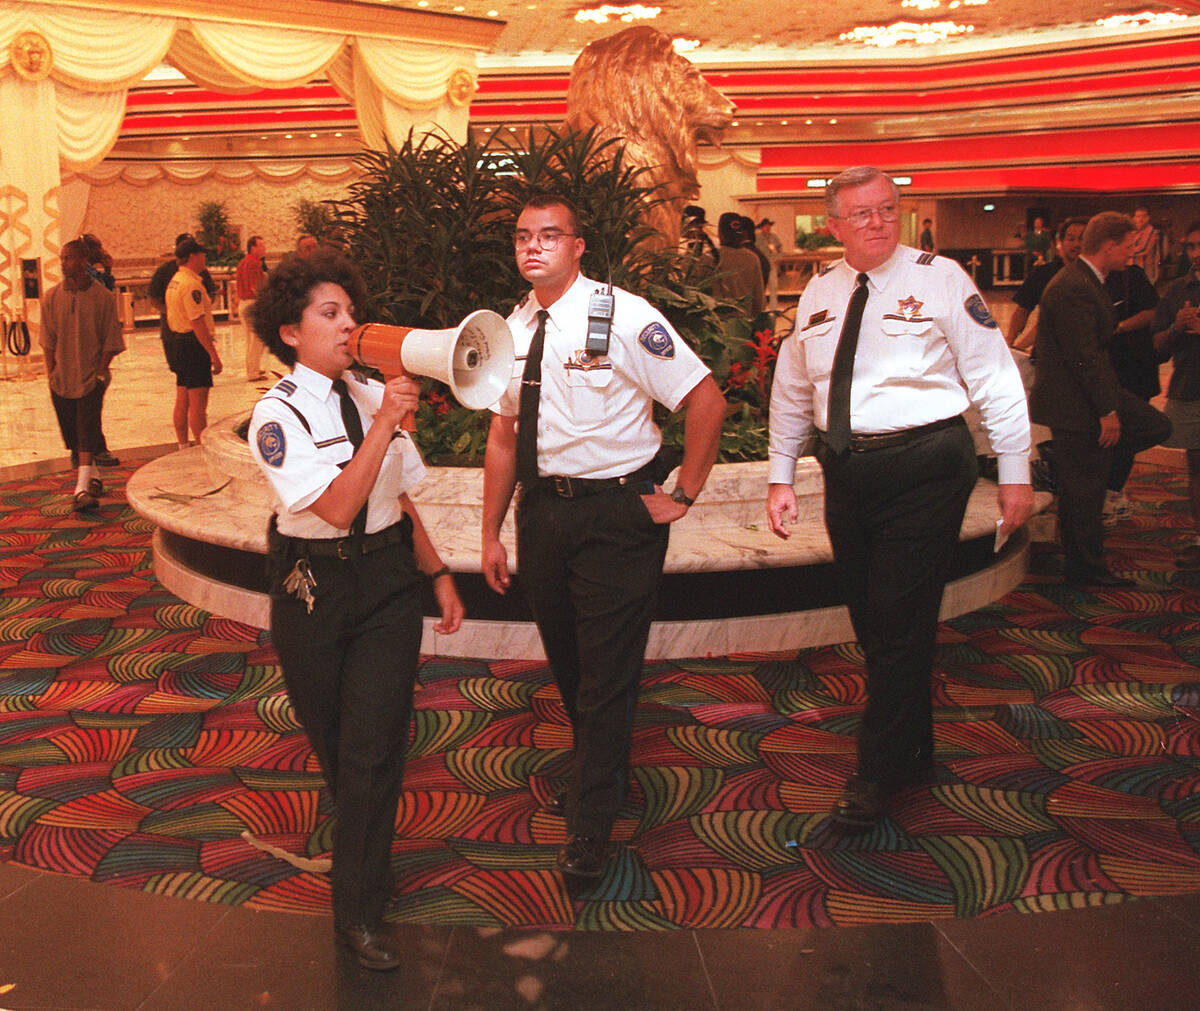 MGM Grand Hotel Security removed anyone who was not a registered guest. (Clint Karlsen)